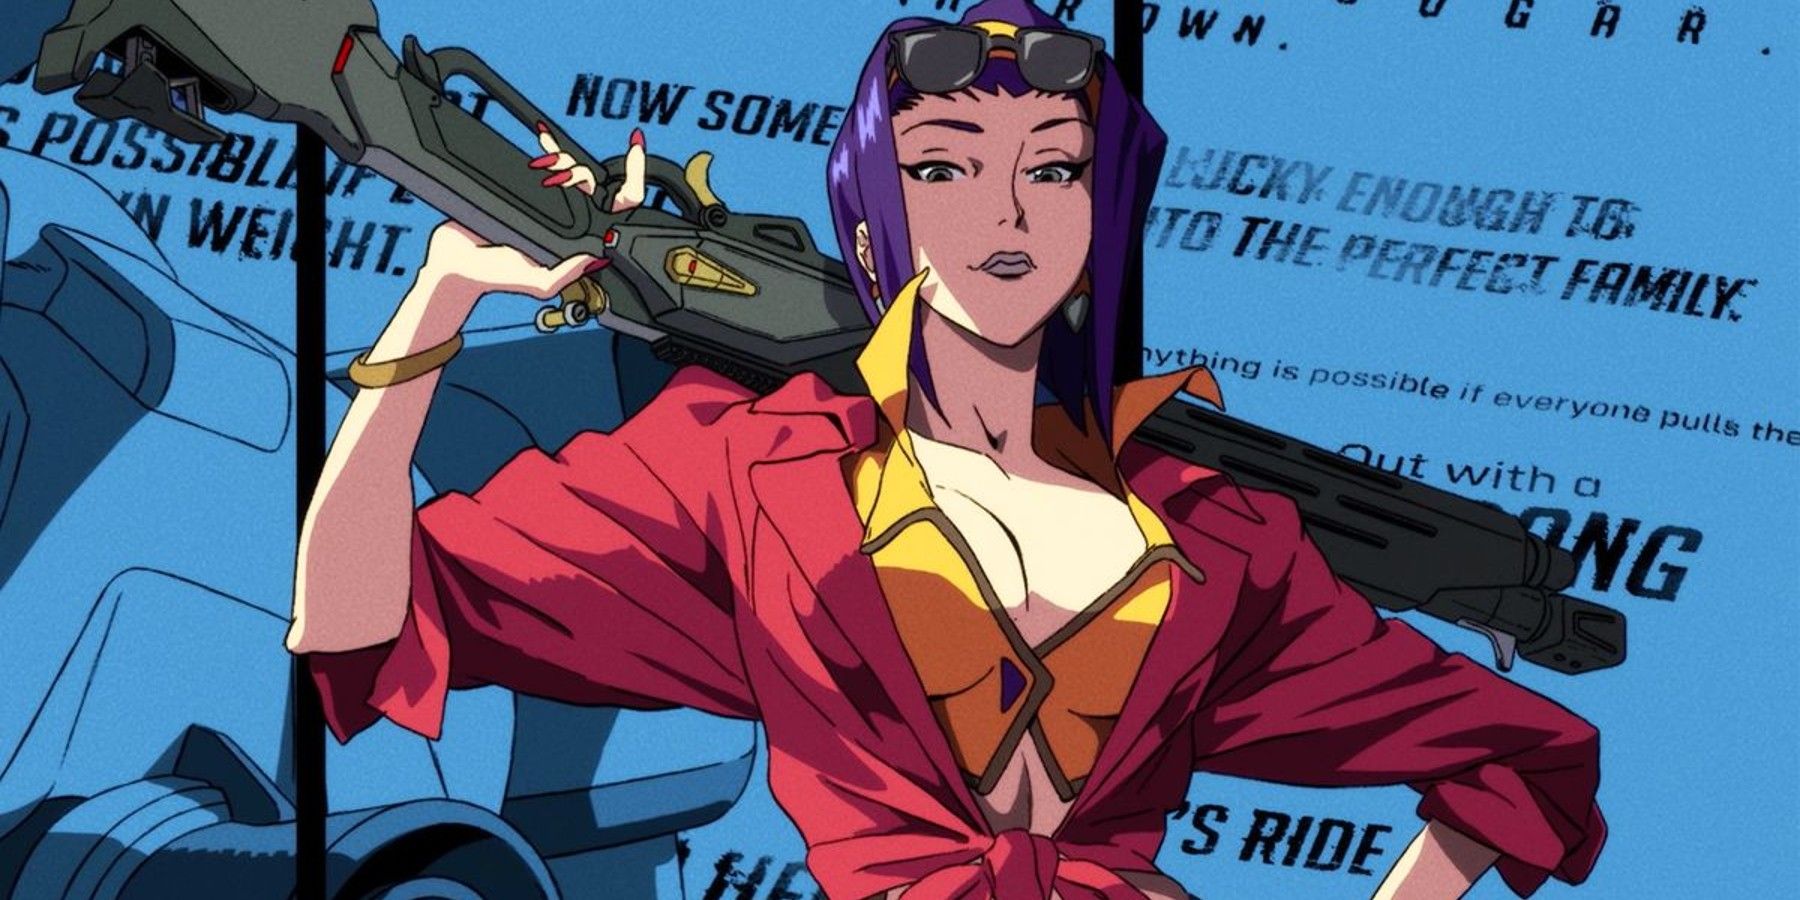 overwatch 2 cowboy bebop crossover trailer screenshot with ashe dressed as faye